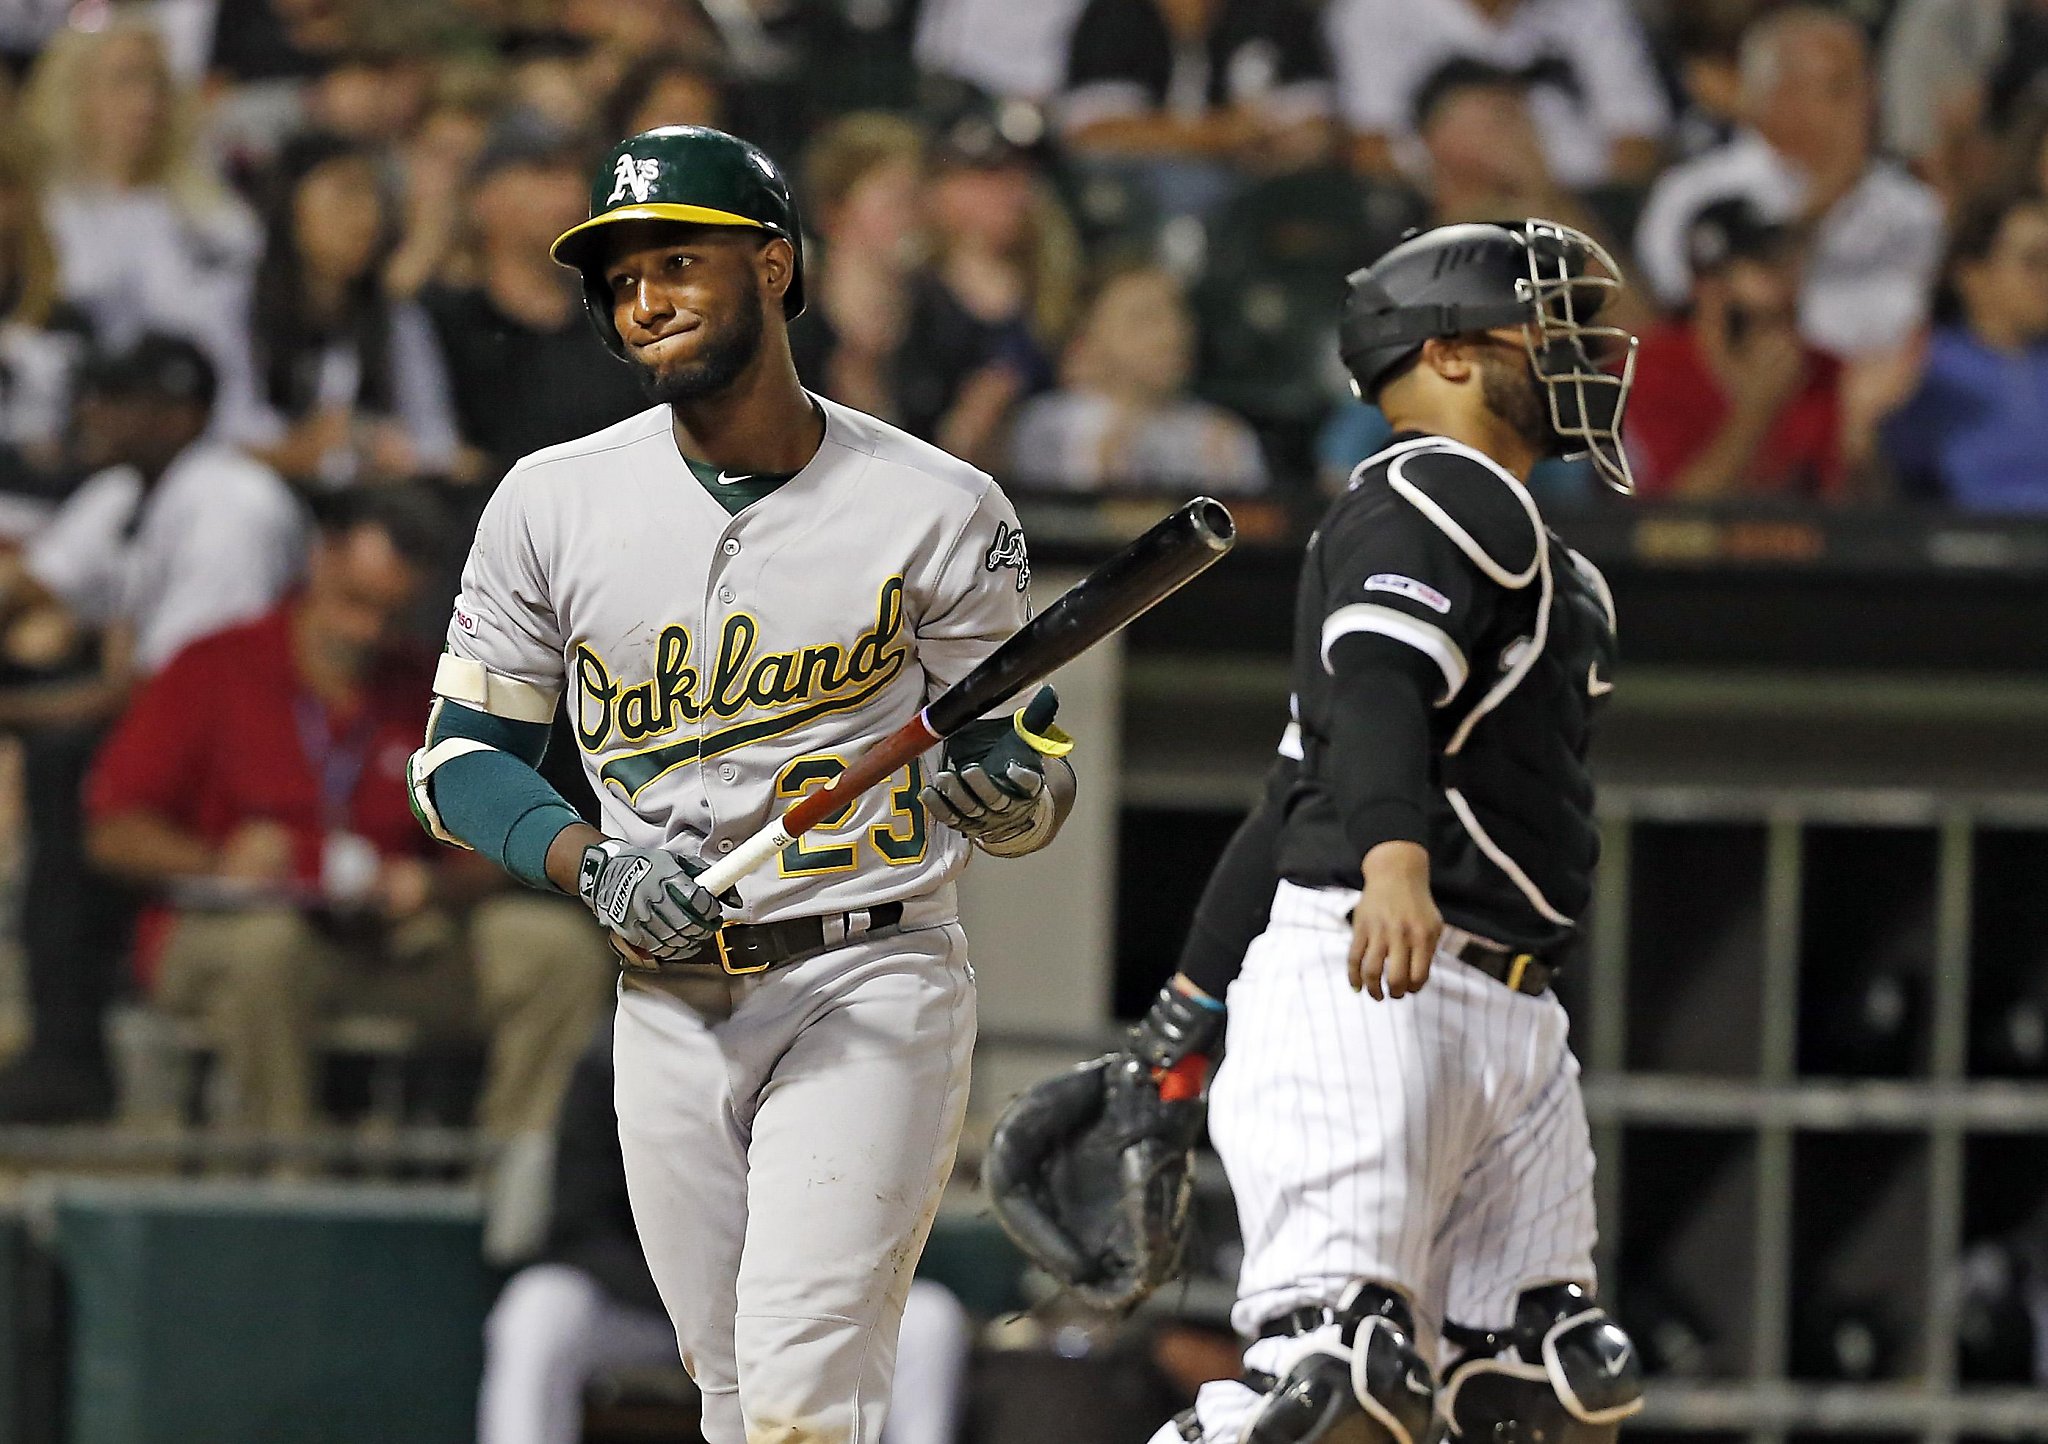 How to fix Jurickson Profar's struggles? A's teammates committed to helping